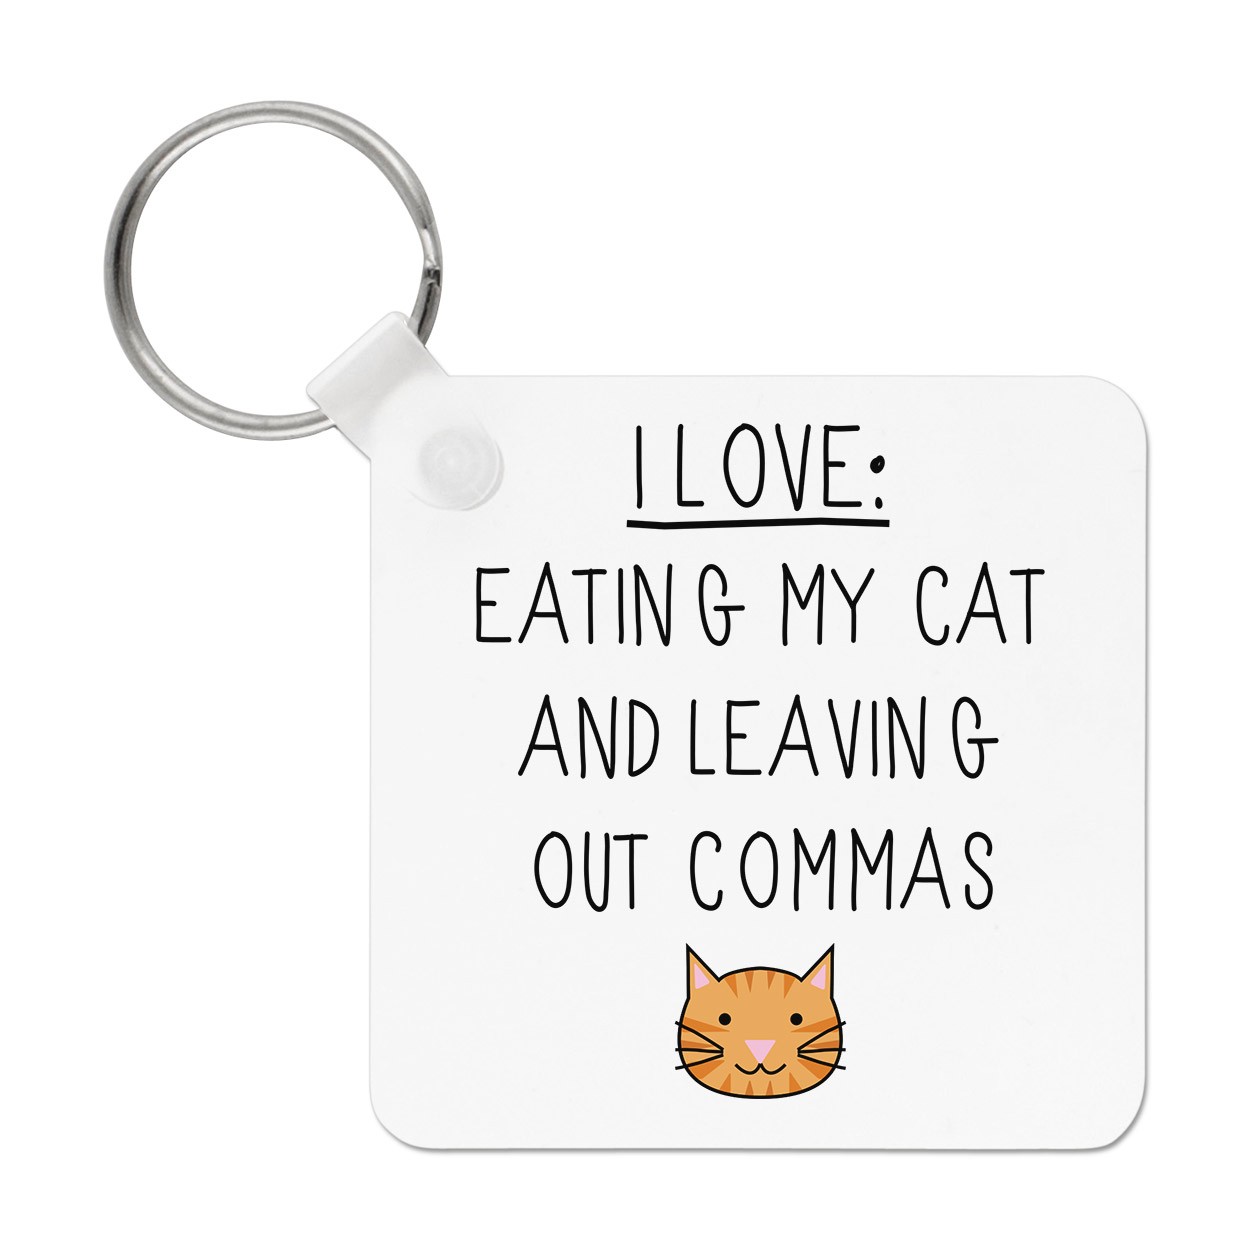 I Love Eating My Cat and Leaving Out Commas Keyring Key Chain